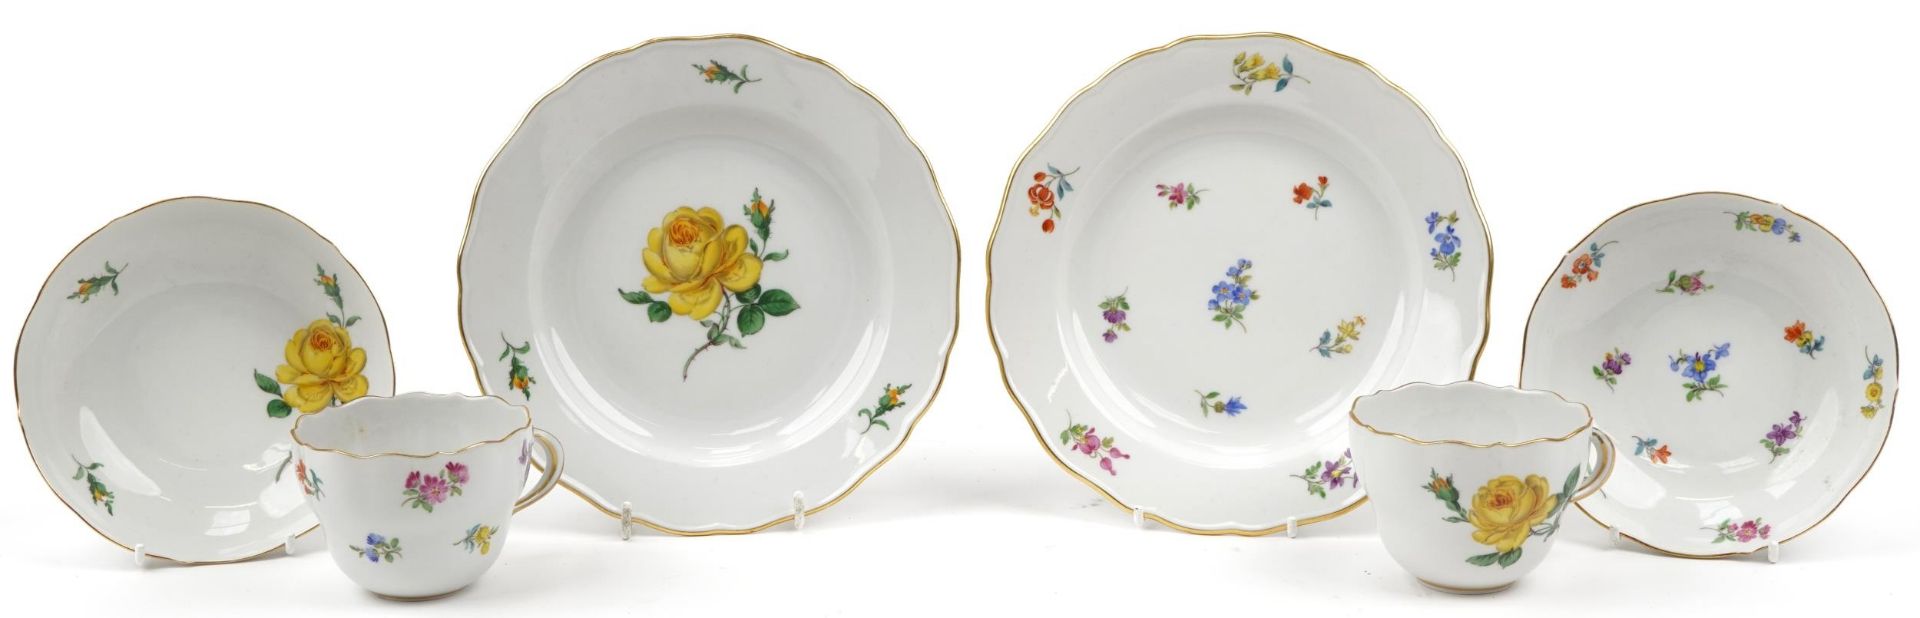 Meissen, German porcelain hand painted with flowers including roses and forget-me-nots comprising